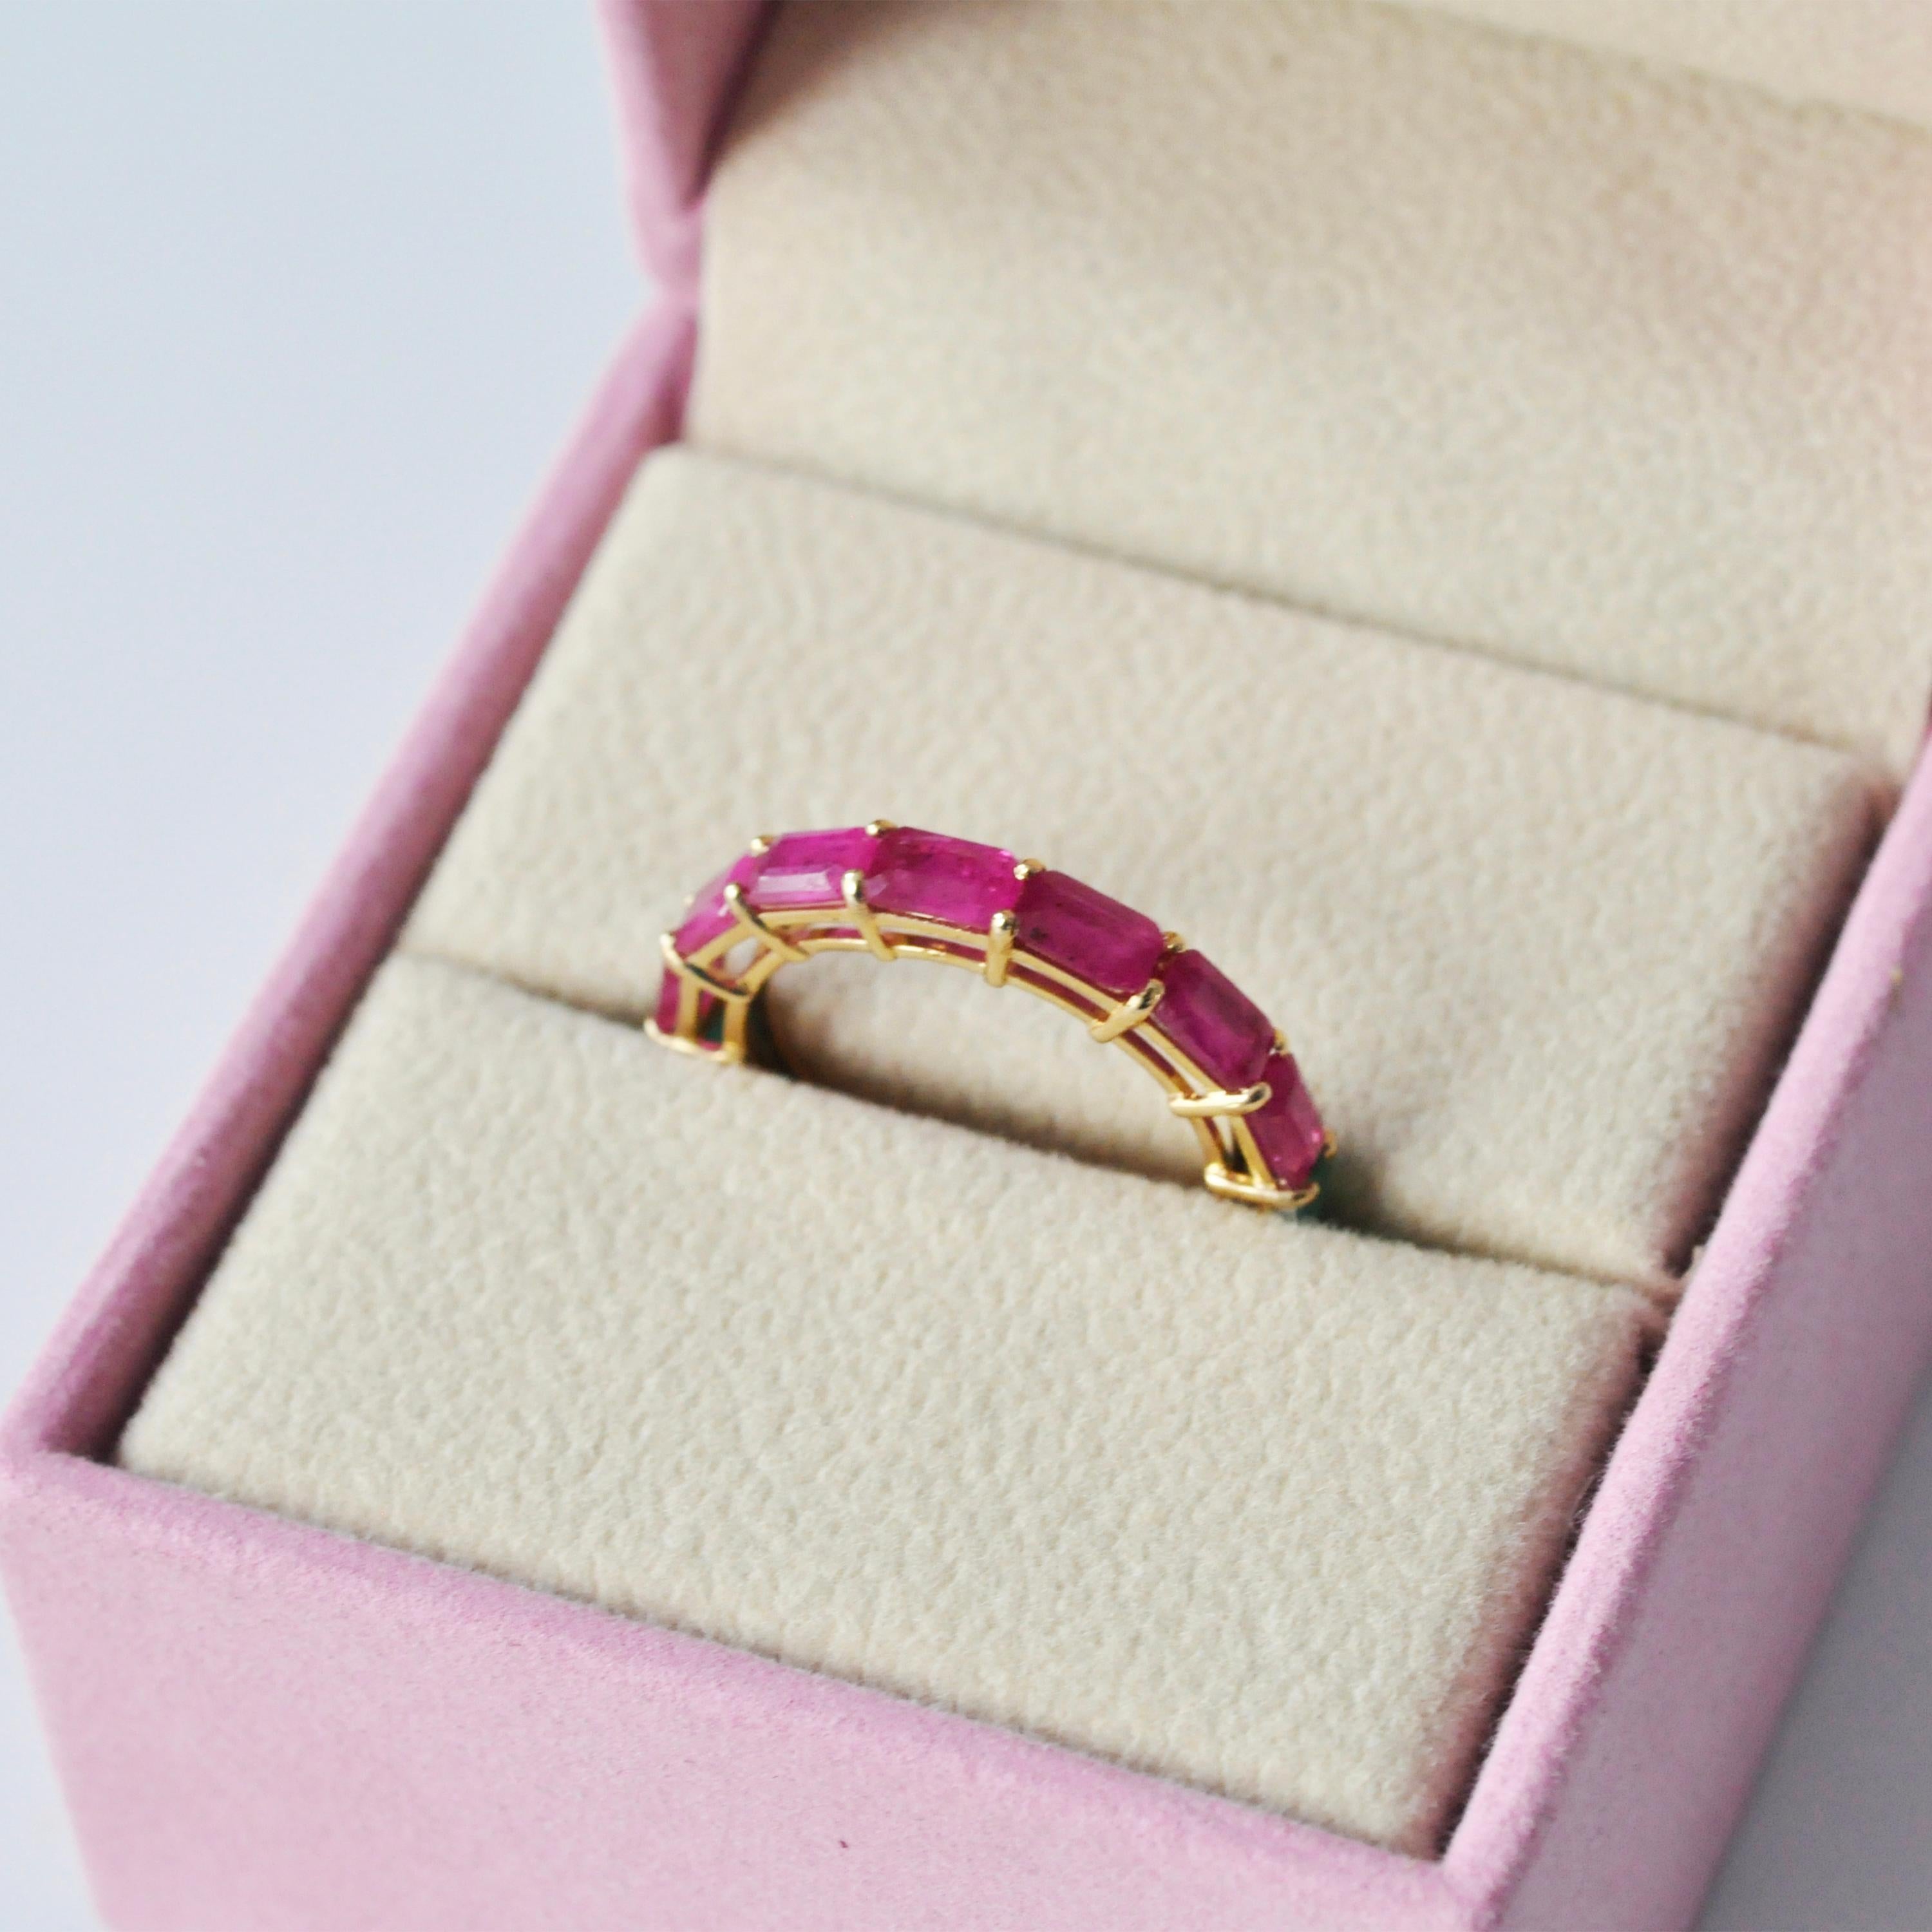 For Sale:  18K Yellow Gold Zambian Emerald Mozambique Ruby 5x3 MM Octagon Eternity Ring 10